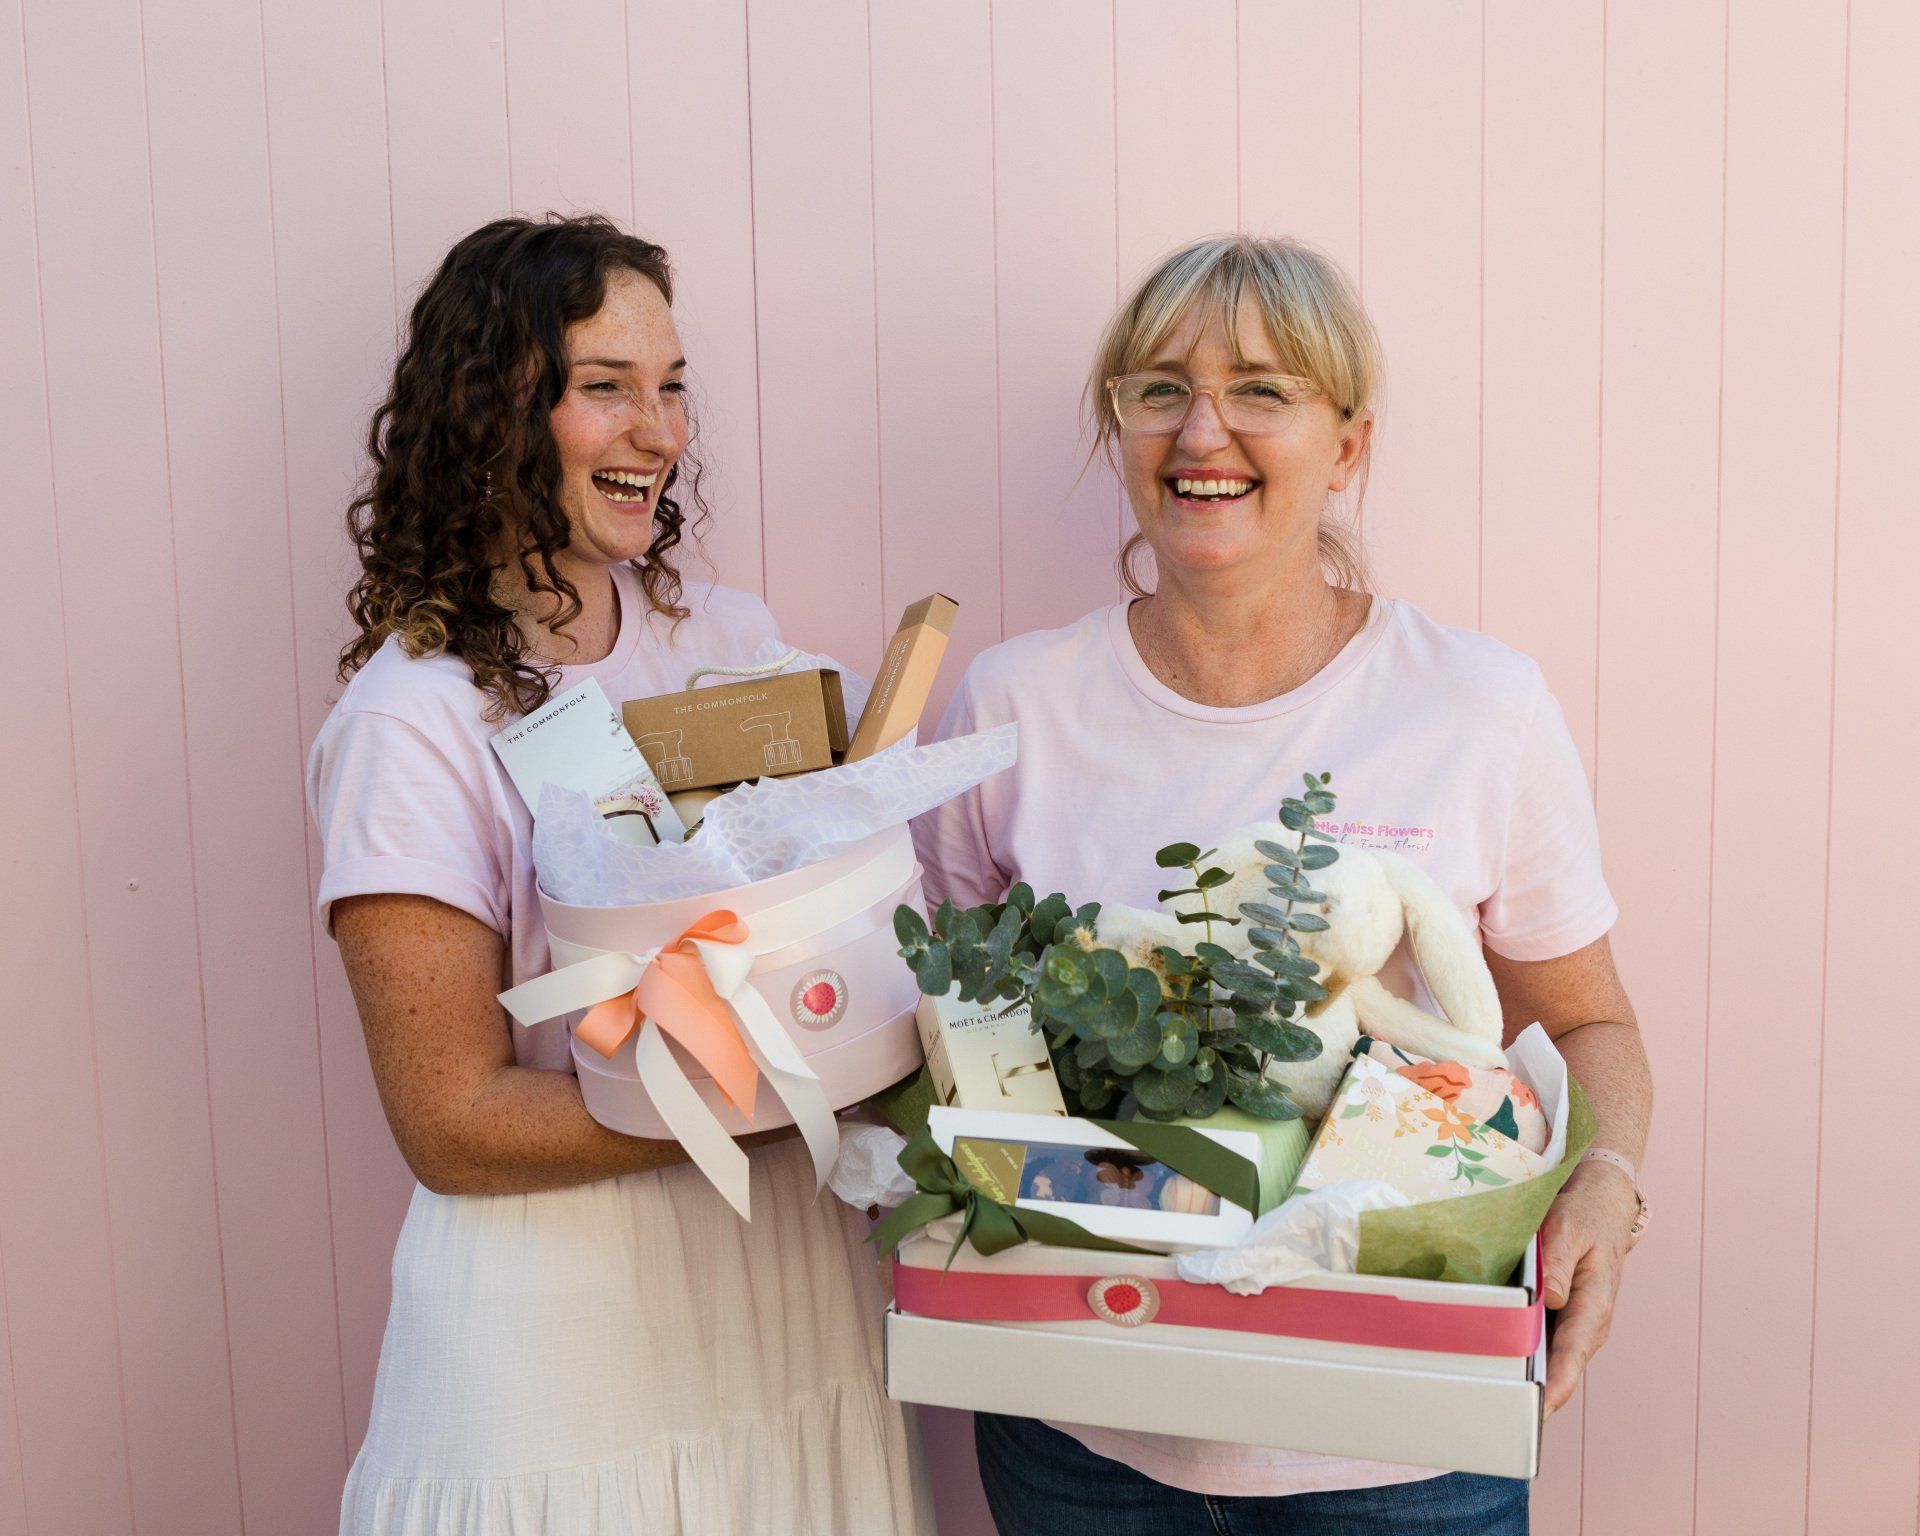 Darwin shop's team presenting baby gift boxes with care and affection.